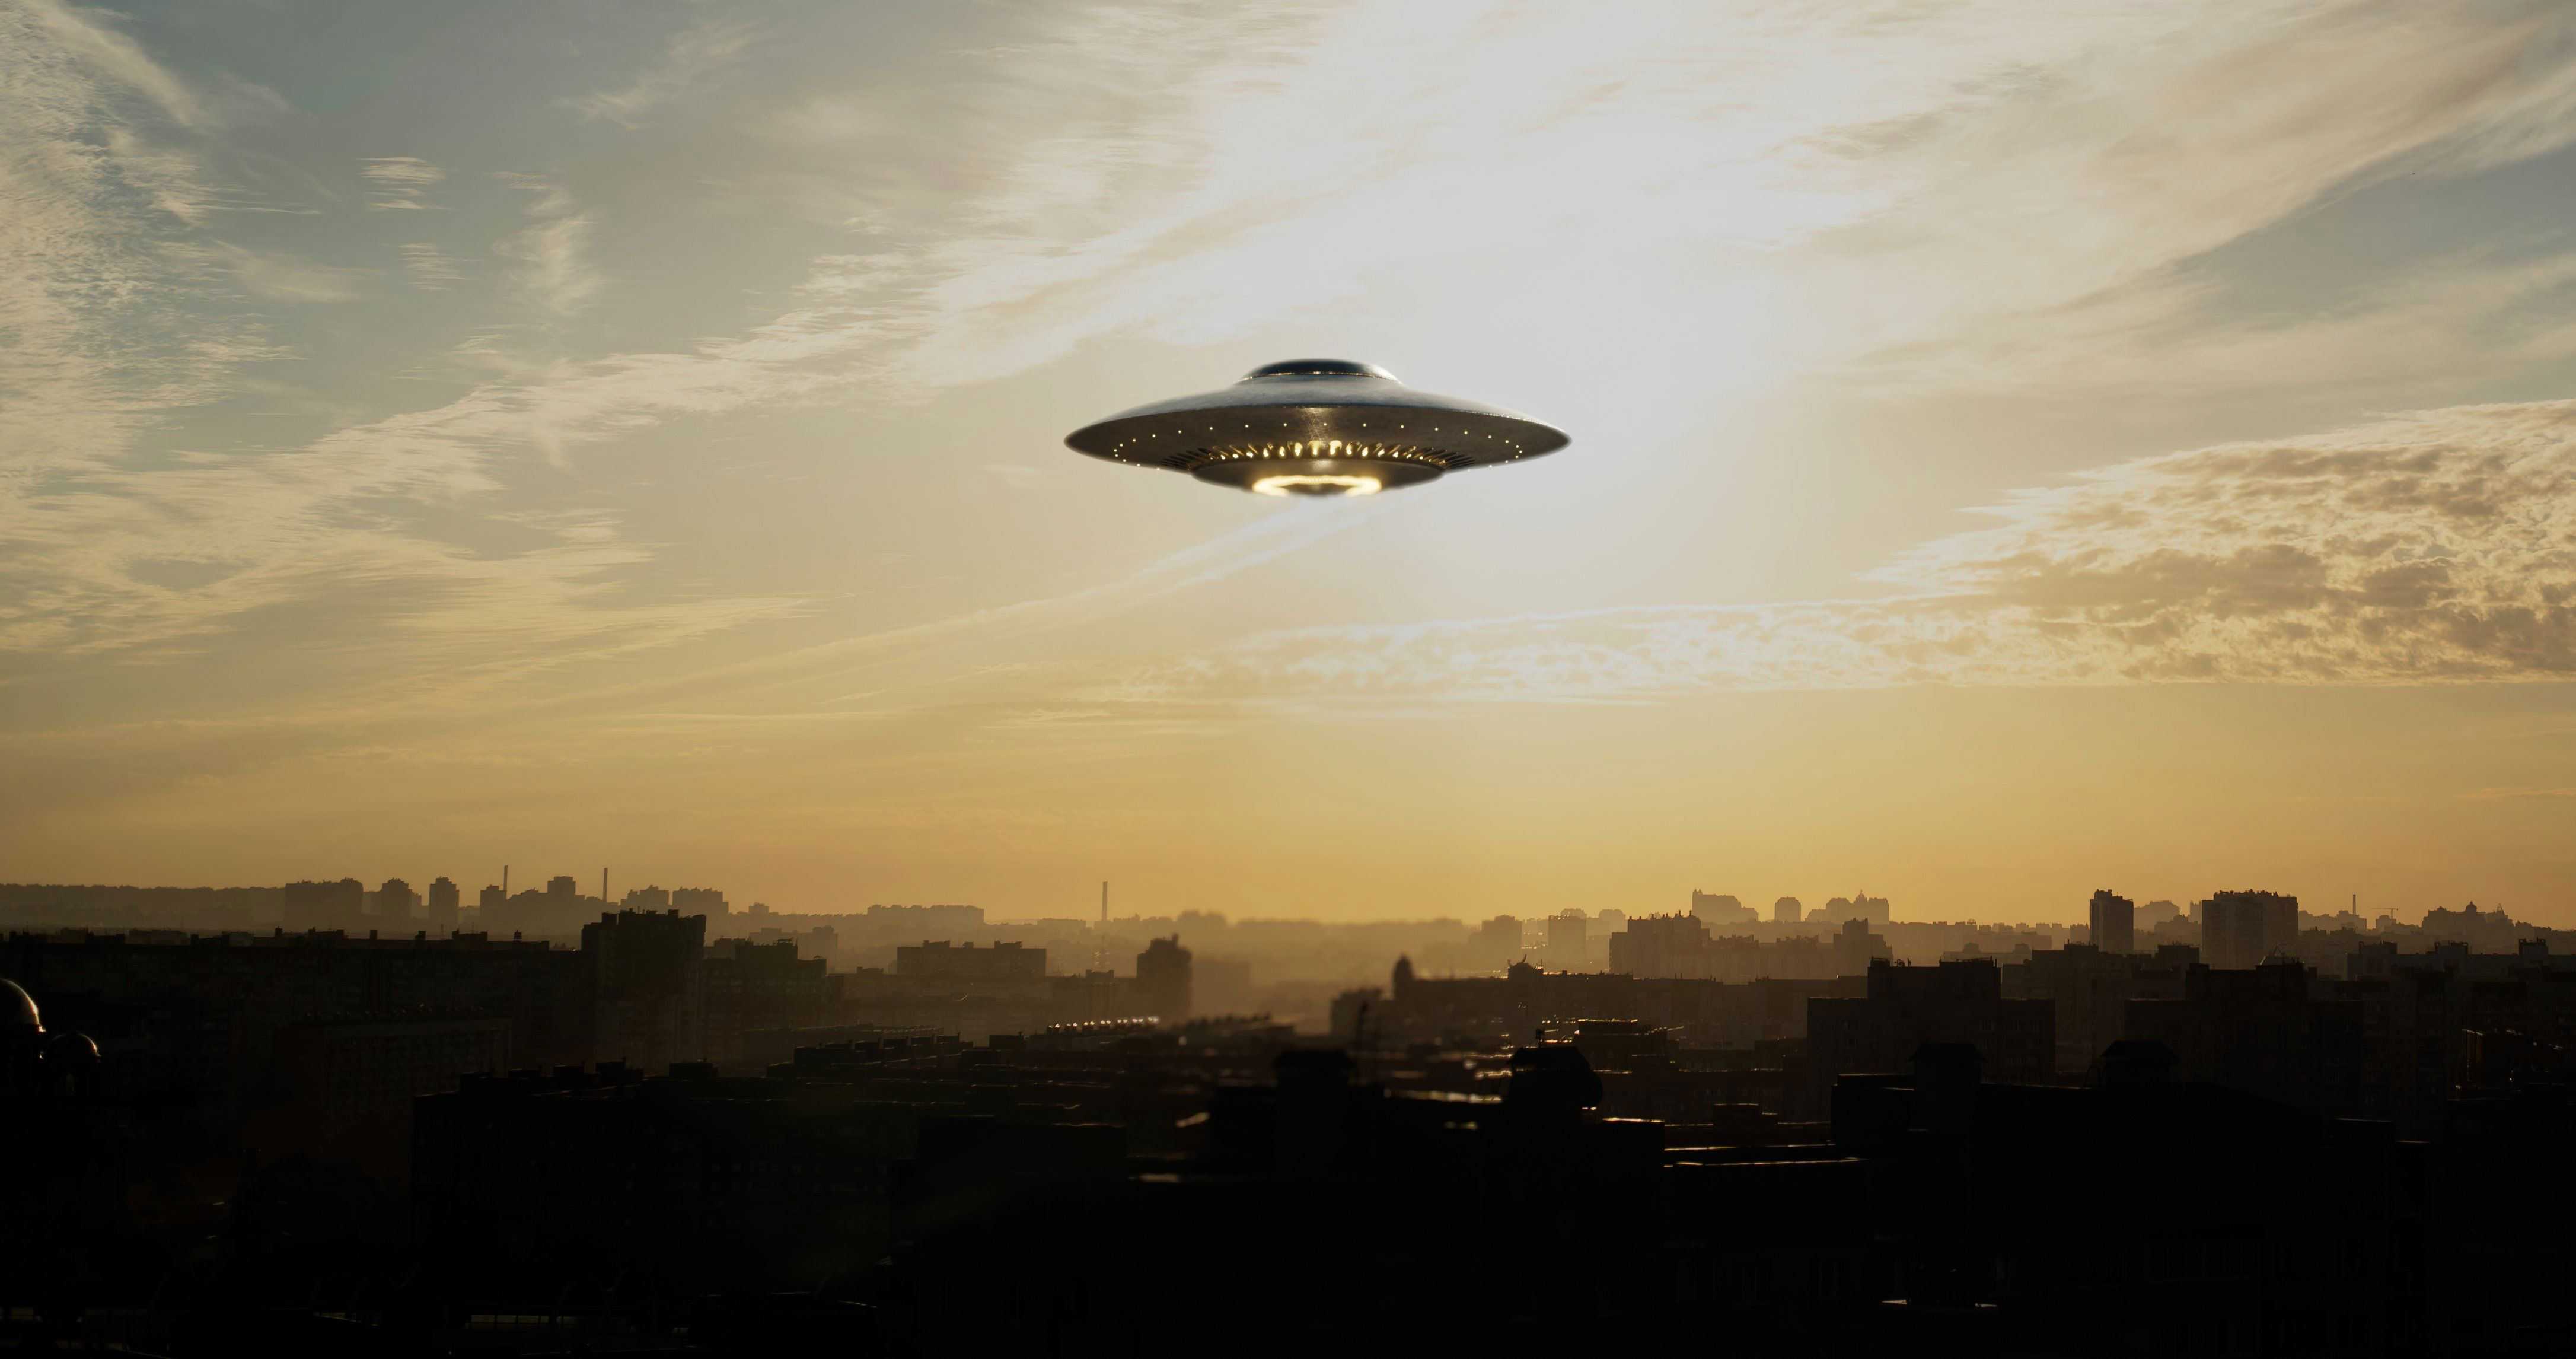 Scientists claim aliens might not be able to travel in space like us